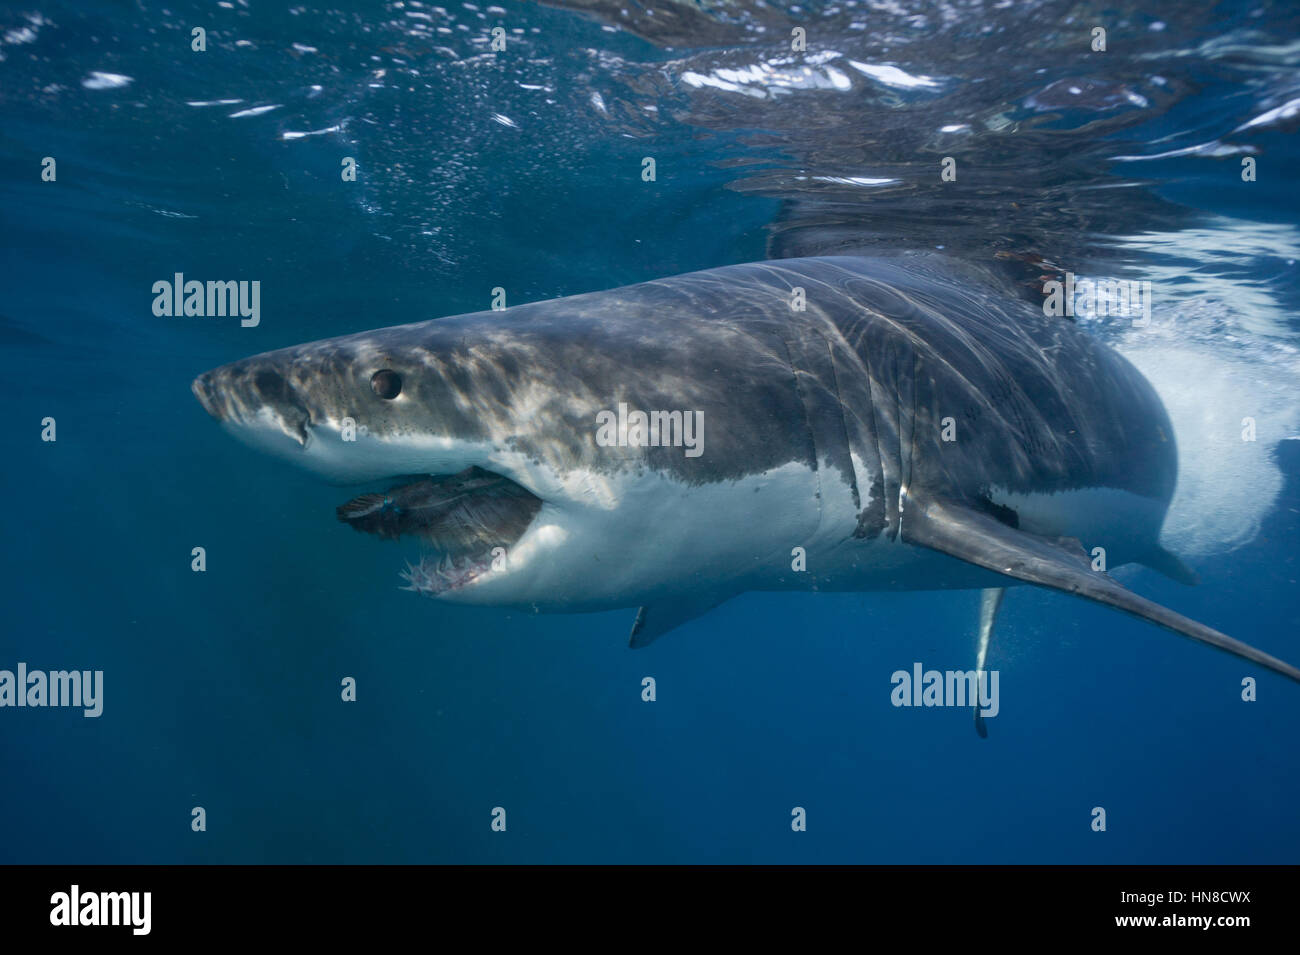 Side view of a Great white shark (Carcharodon carcharias), South Australia Stock Photo